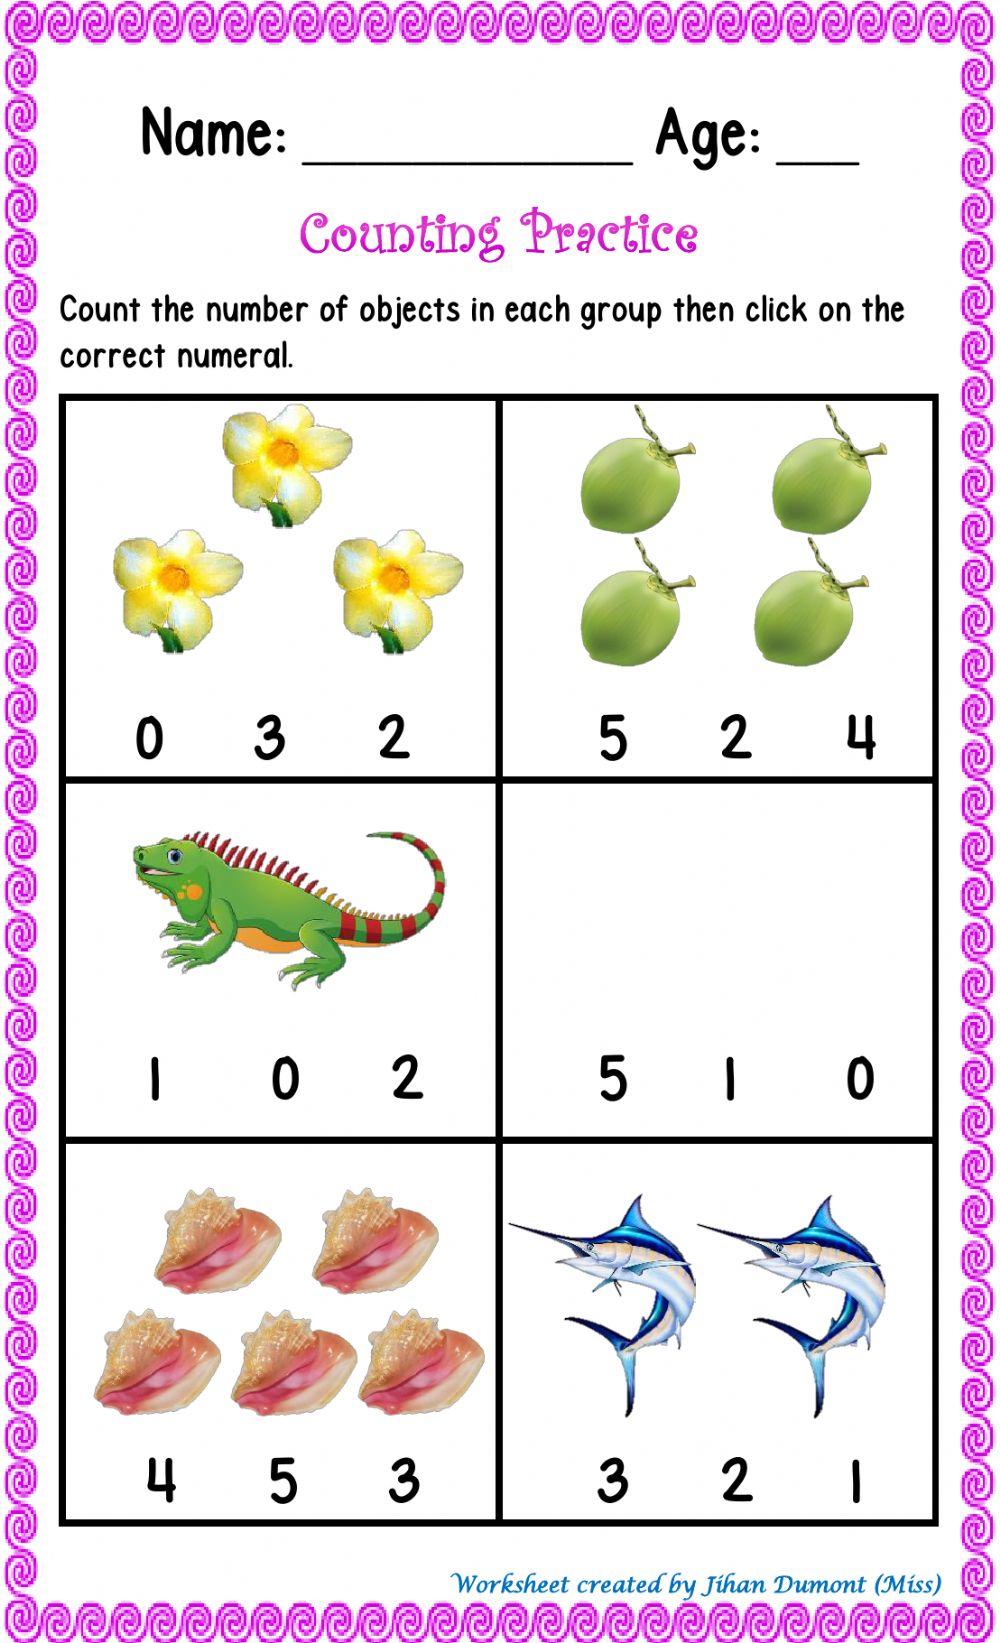 Counting Sets 0-5